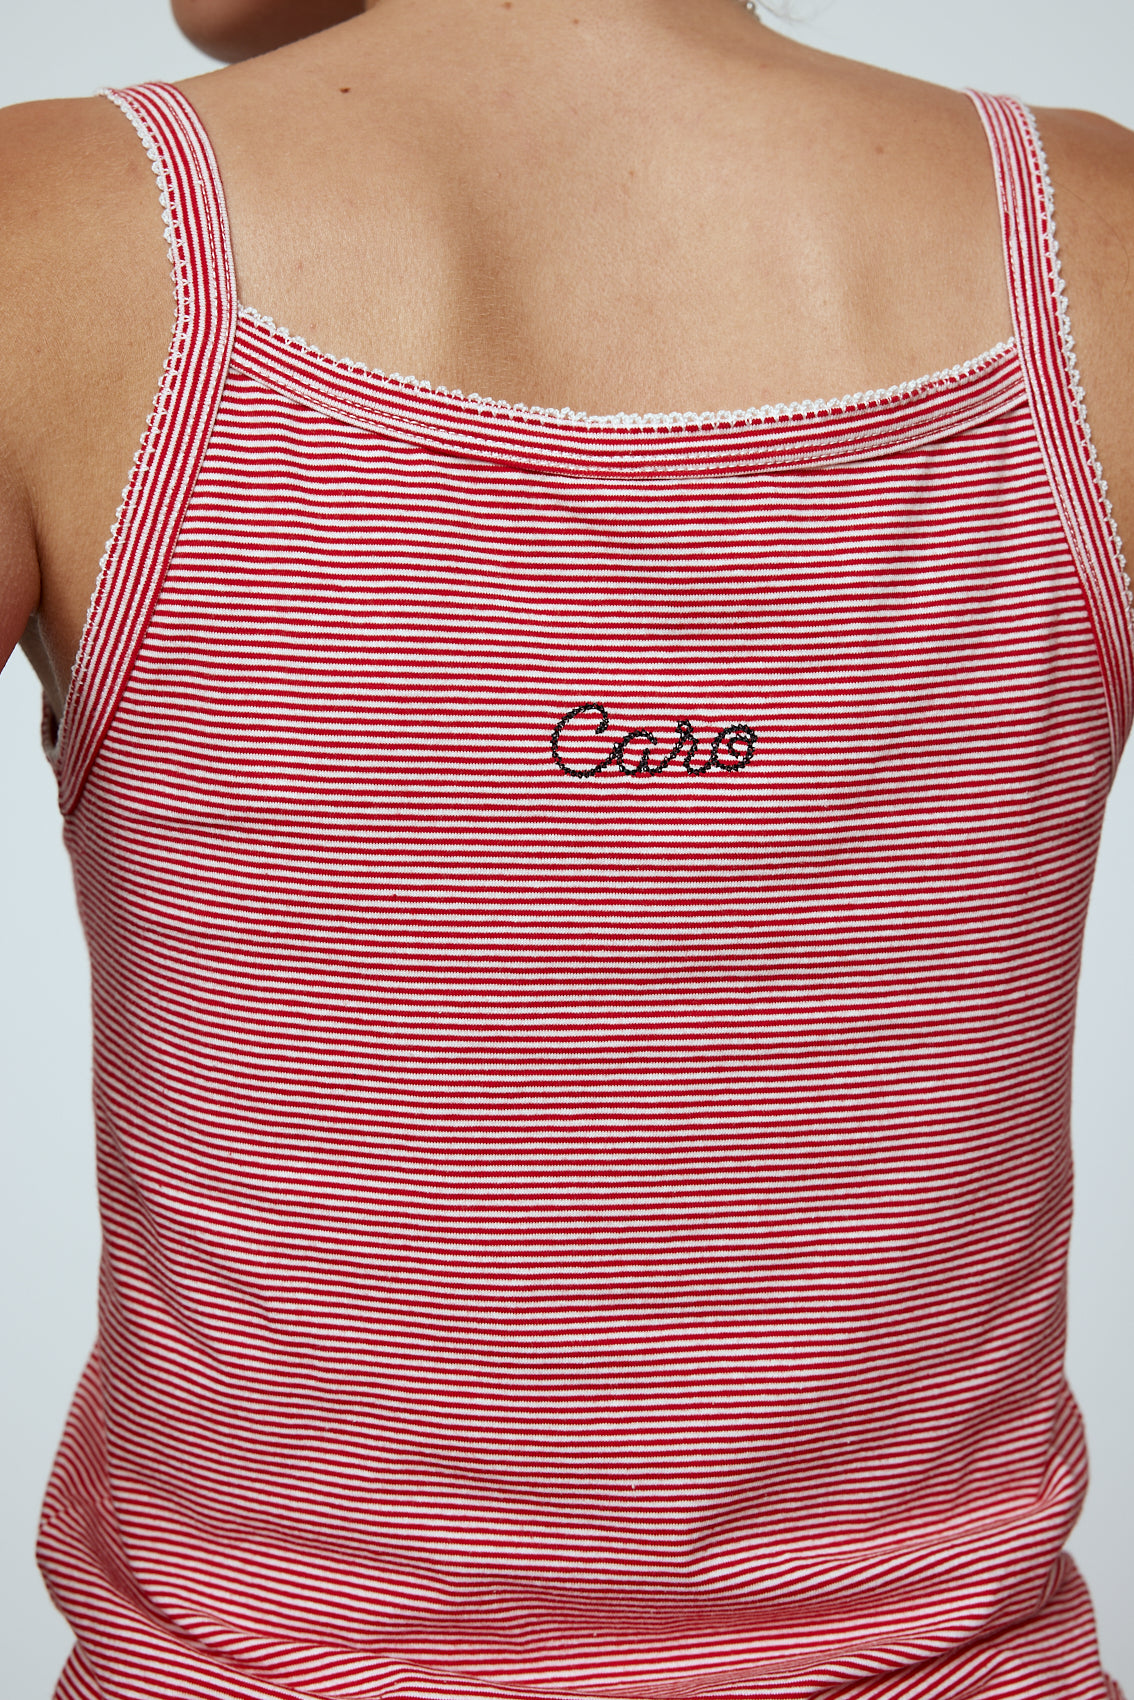 Caro Editions' new signature line in jersey cotton.  The Caro Tank is a fitted style with a ribbon bow detail at the front and embroidered Caro Editions logo on the back.   Also available in White, Pink White stripe, and Black White stripe.  Style the Caro Tank under shirts or dresses, or wear them on their own.  Material: 95% cotton, 5% elastane. Bow: 100% Polyester.  The model is 179cm (5'10") and wears size S.